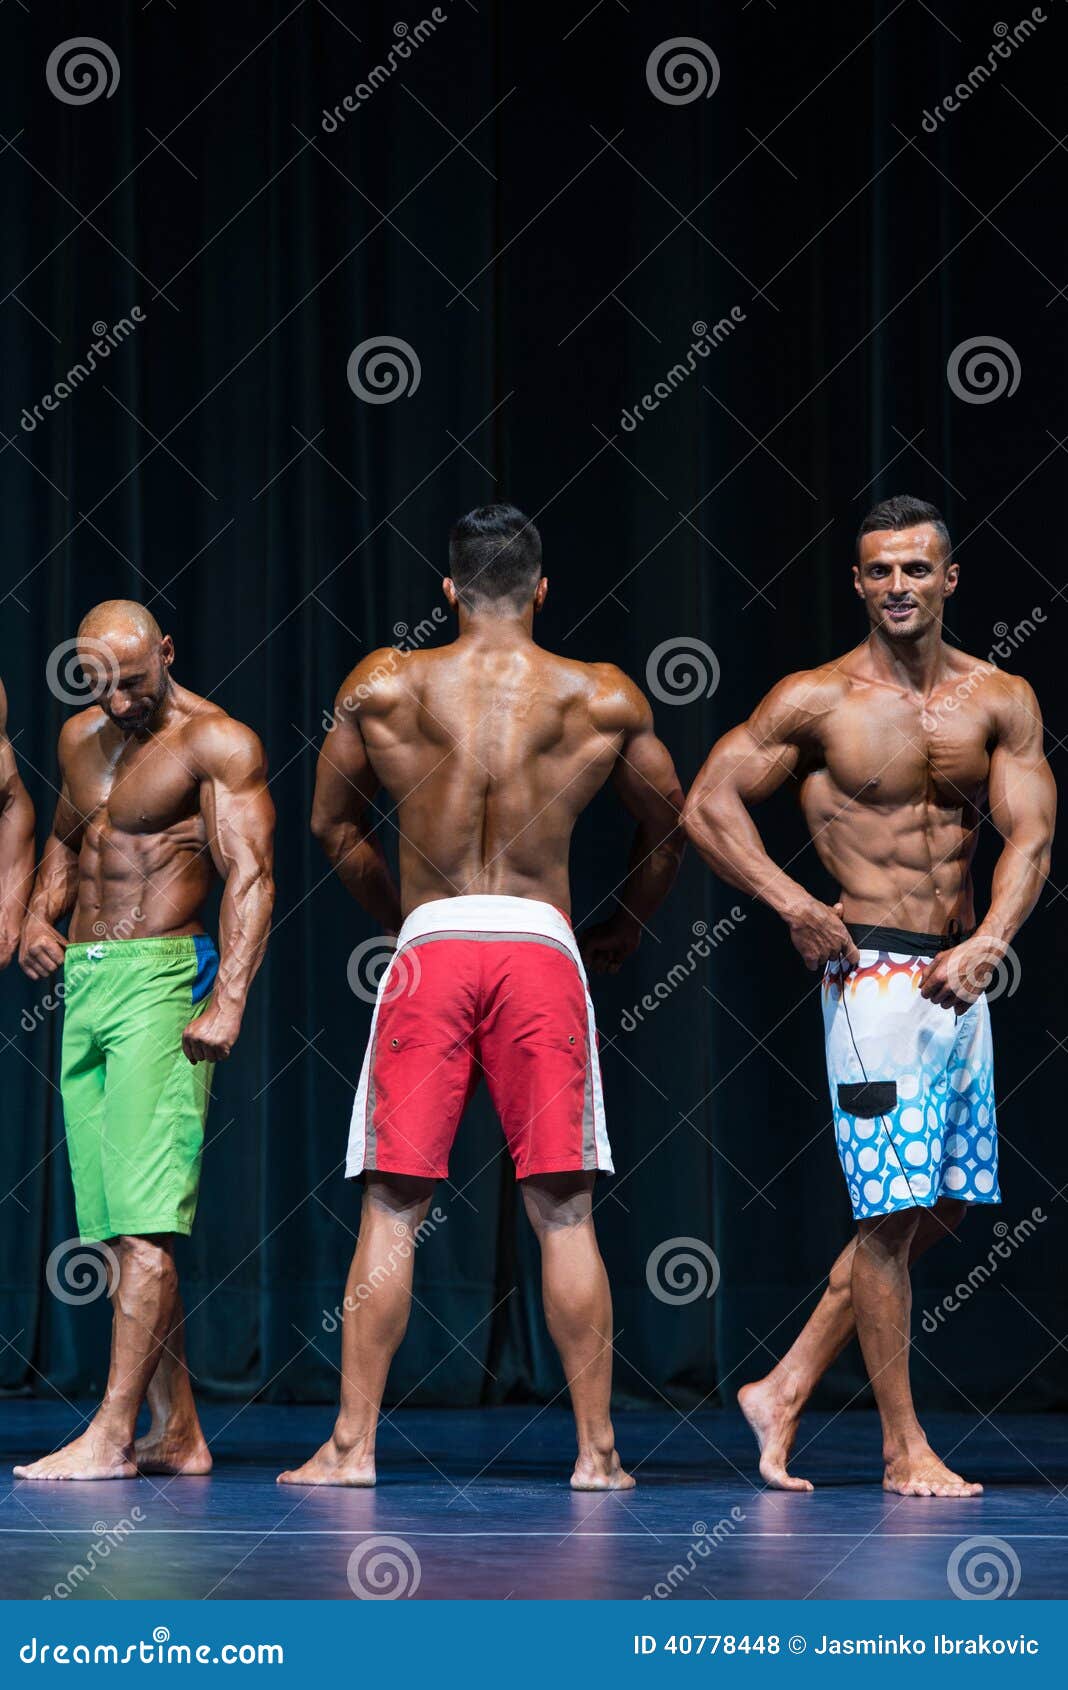 mens physique posing bodybuilding competition body building 40778448